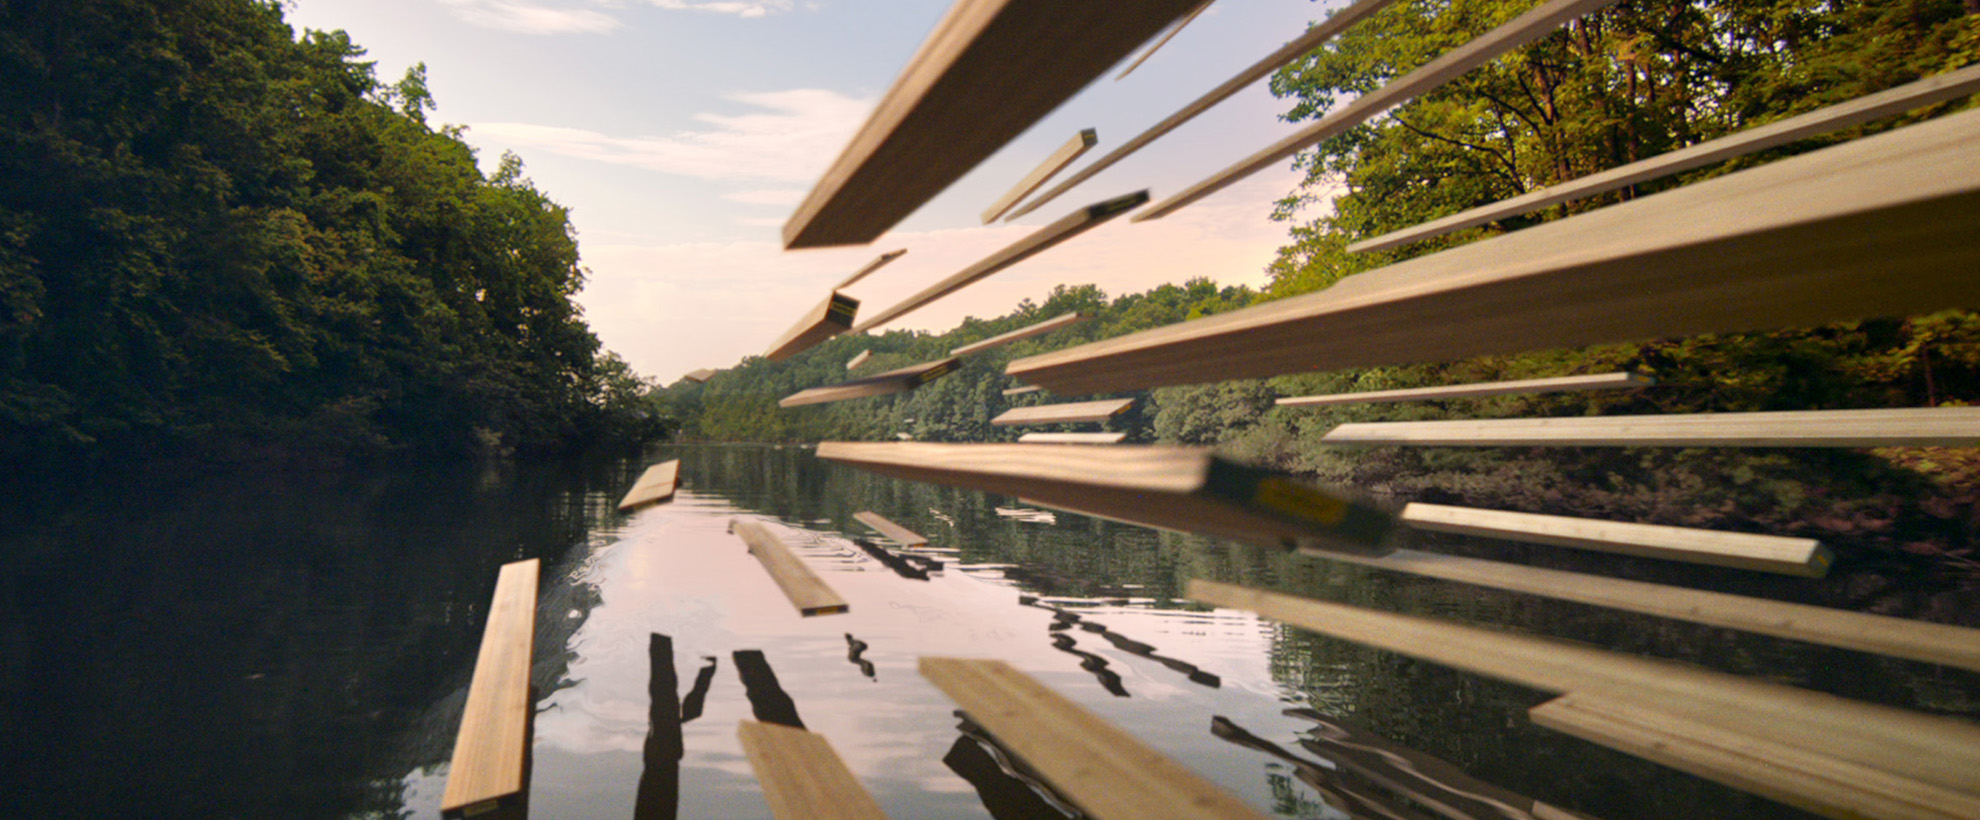 Wood boards soar over a calm lake surrounded by trees